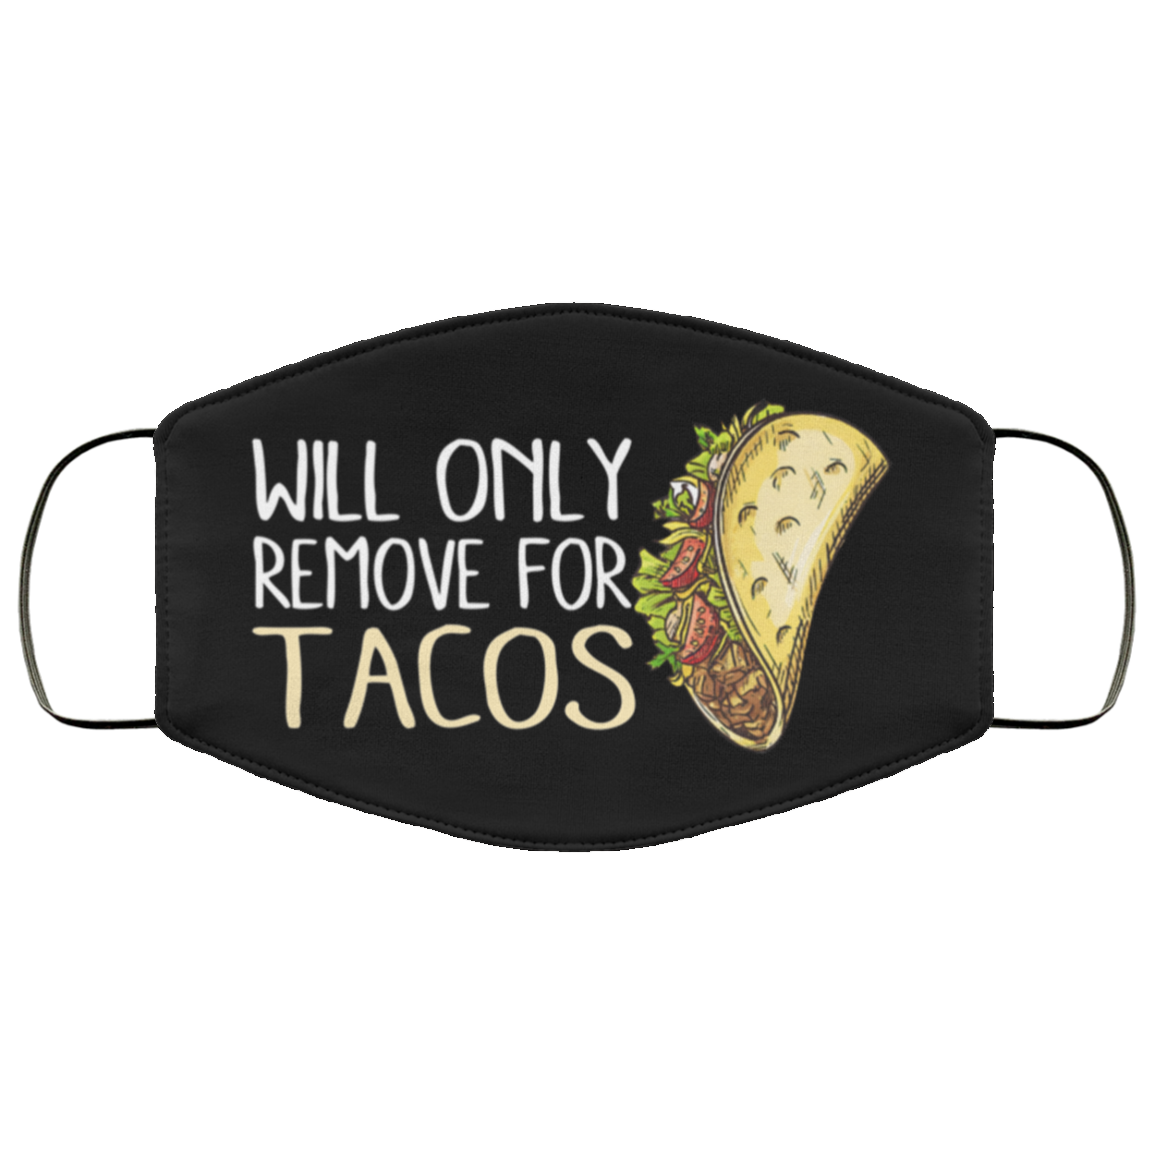 Will only remove for tacos Fabric face mask